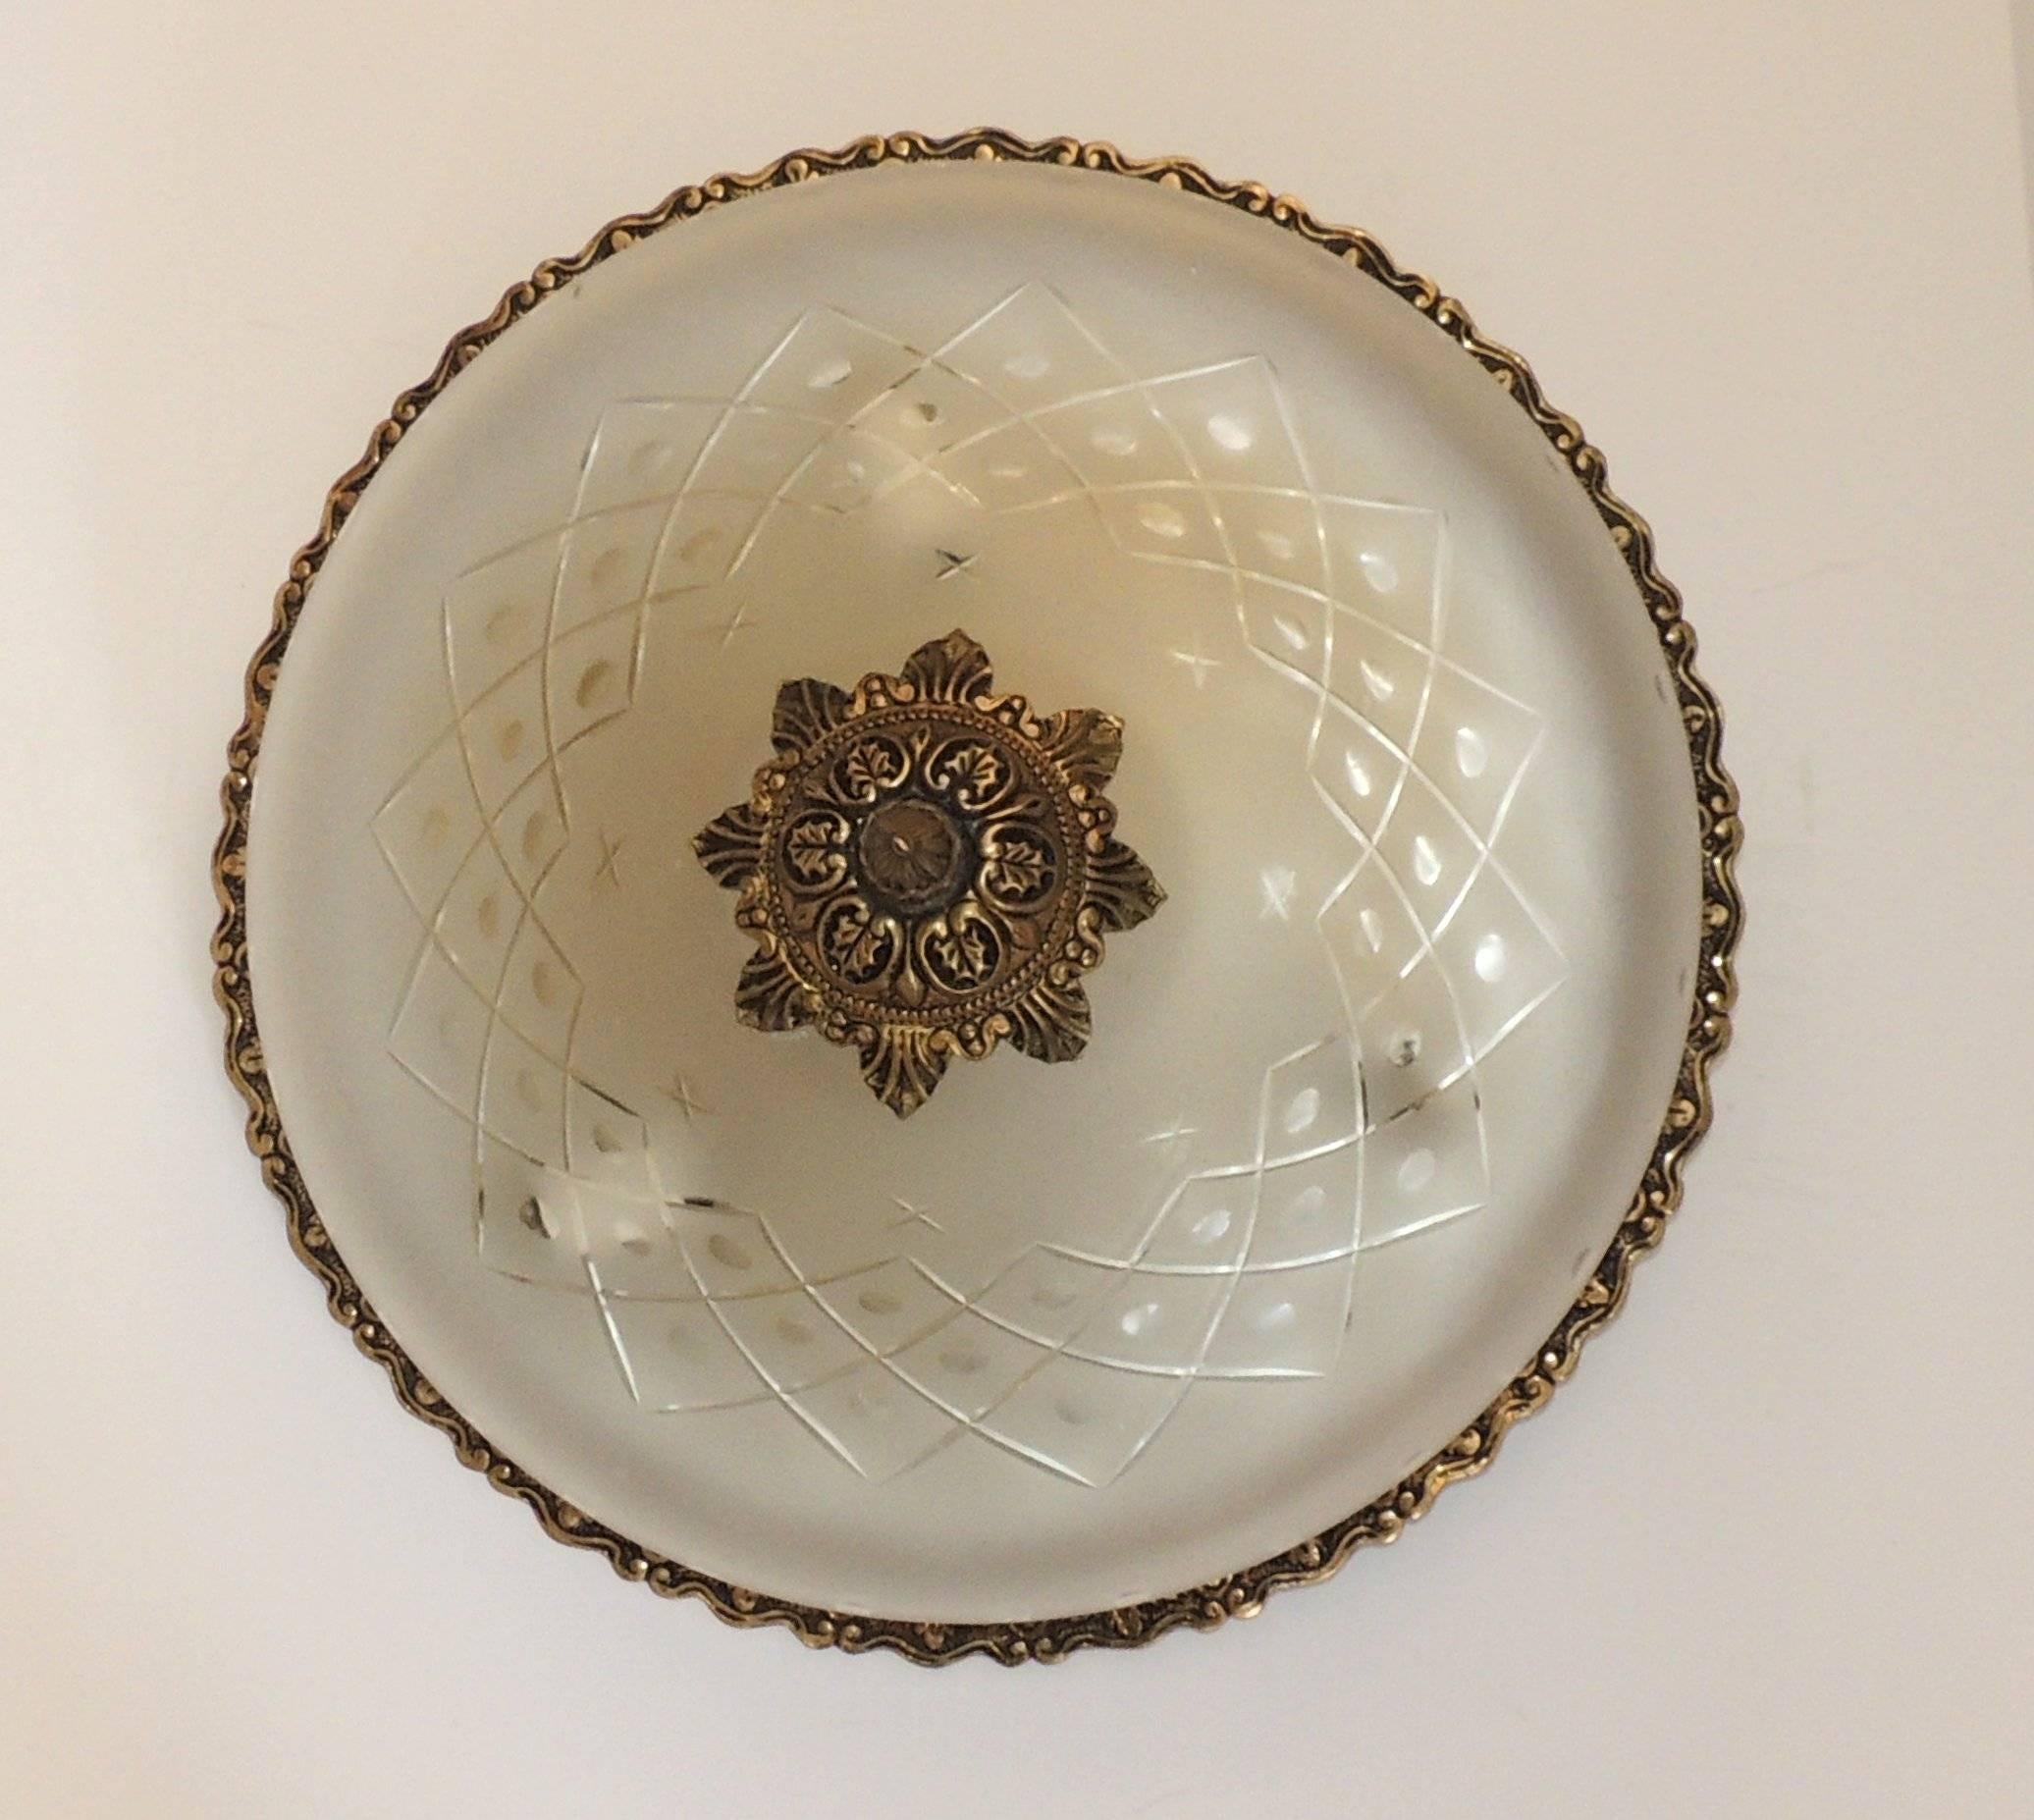 This wonderful Neoclassical bronze flush mount fixture with the cut-glass stars on the frosted glass will give off a very soft and pretty light to your space. The antiqued bronze finish is beautifully done in a graduated filigree trim around the